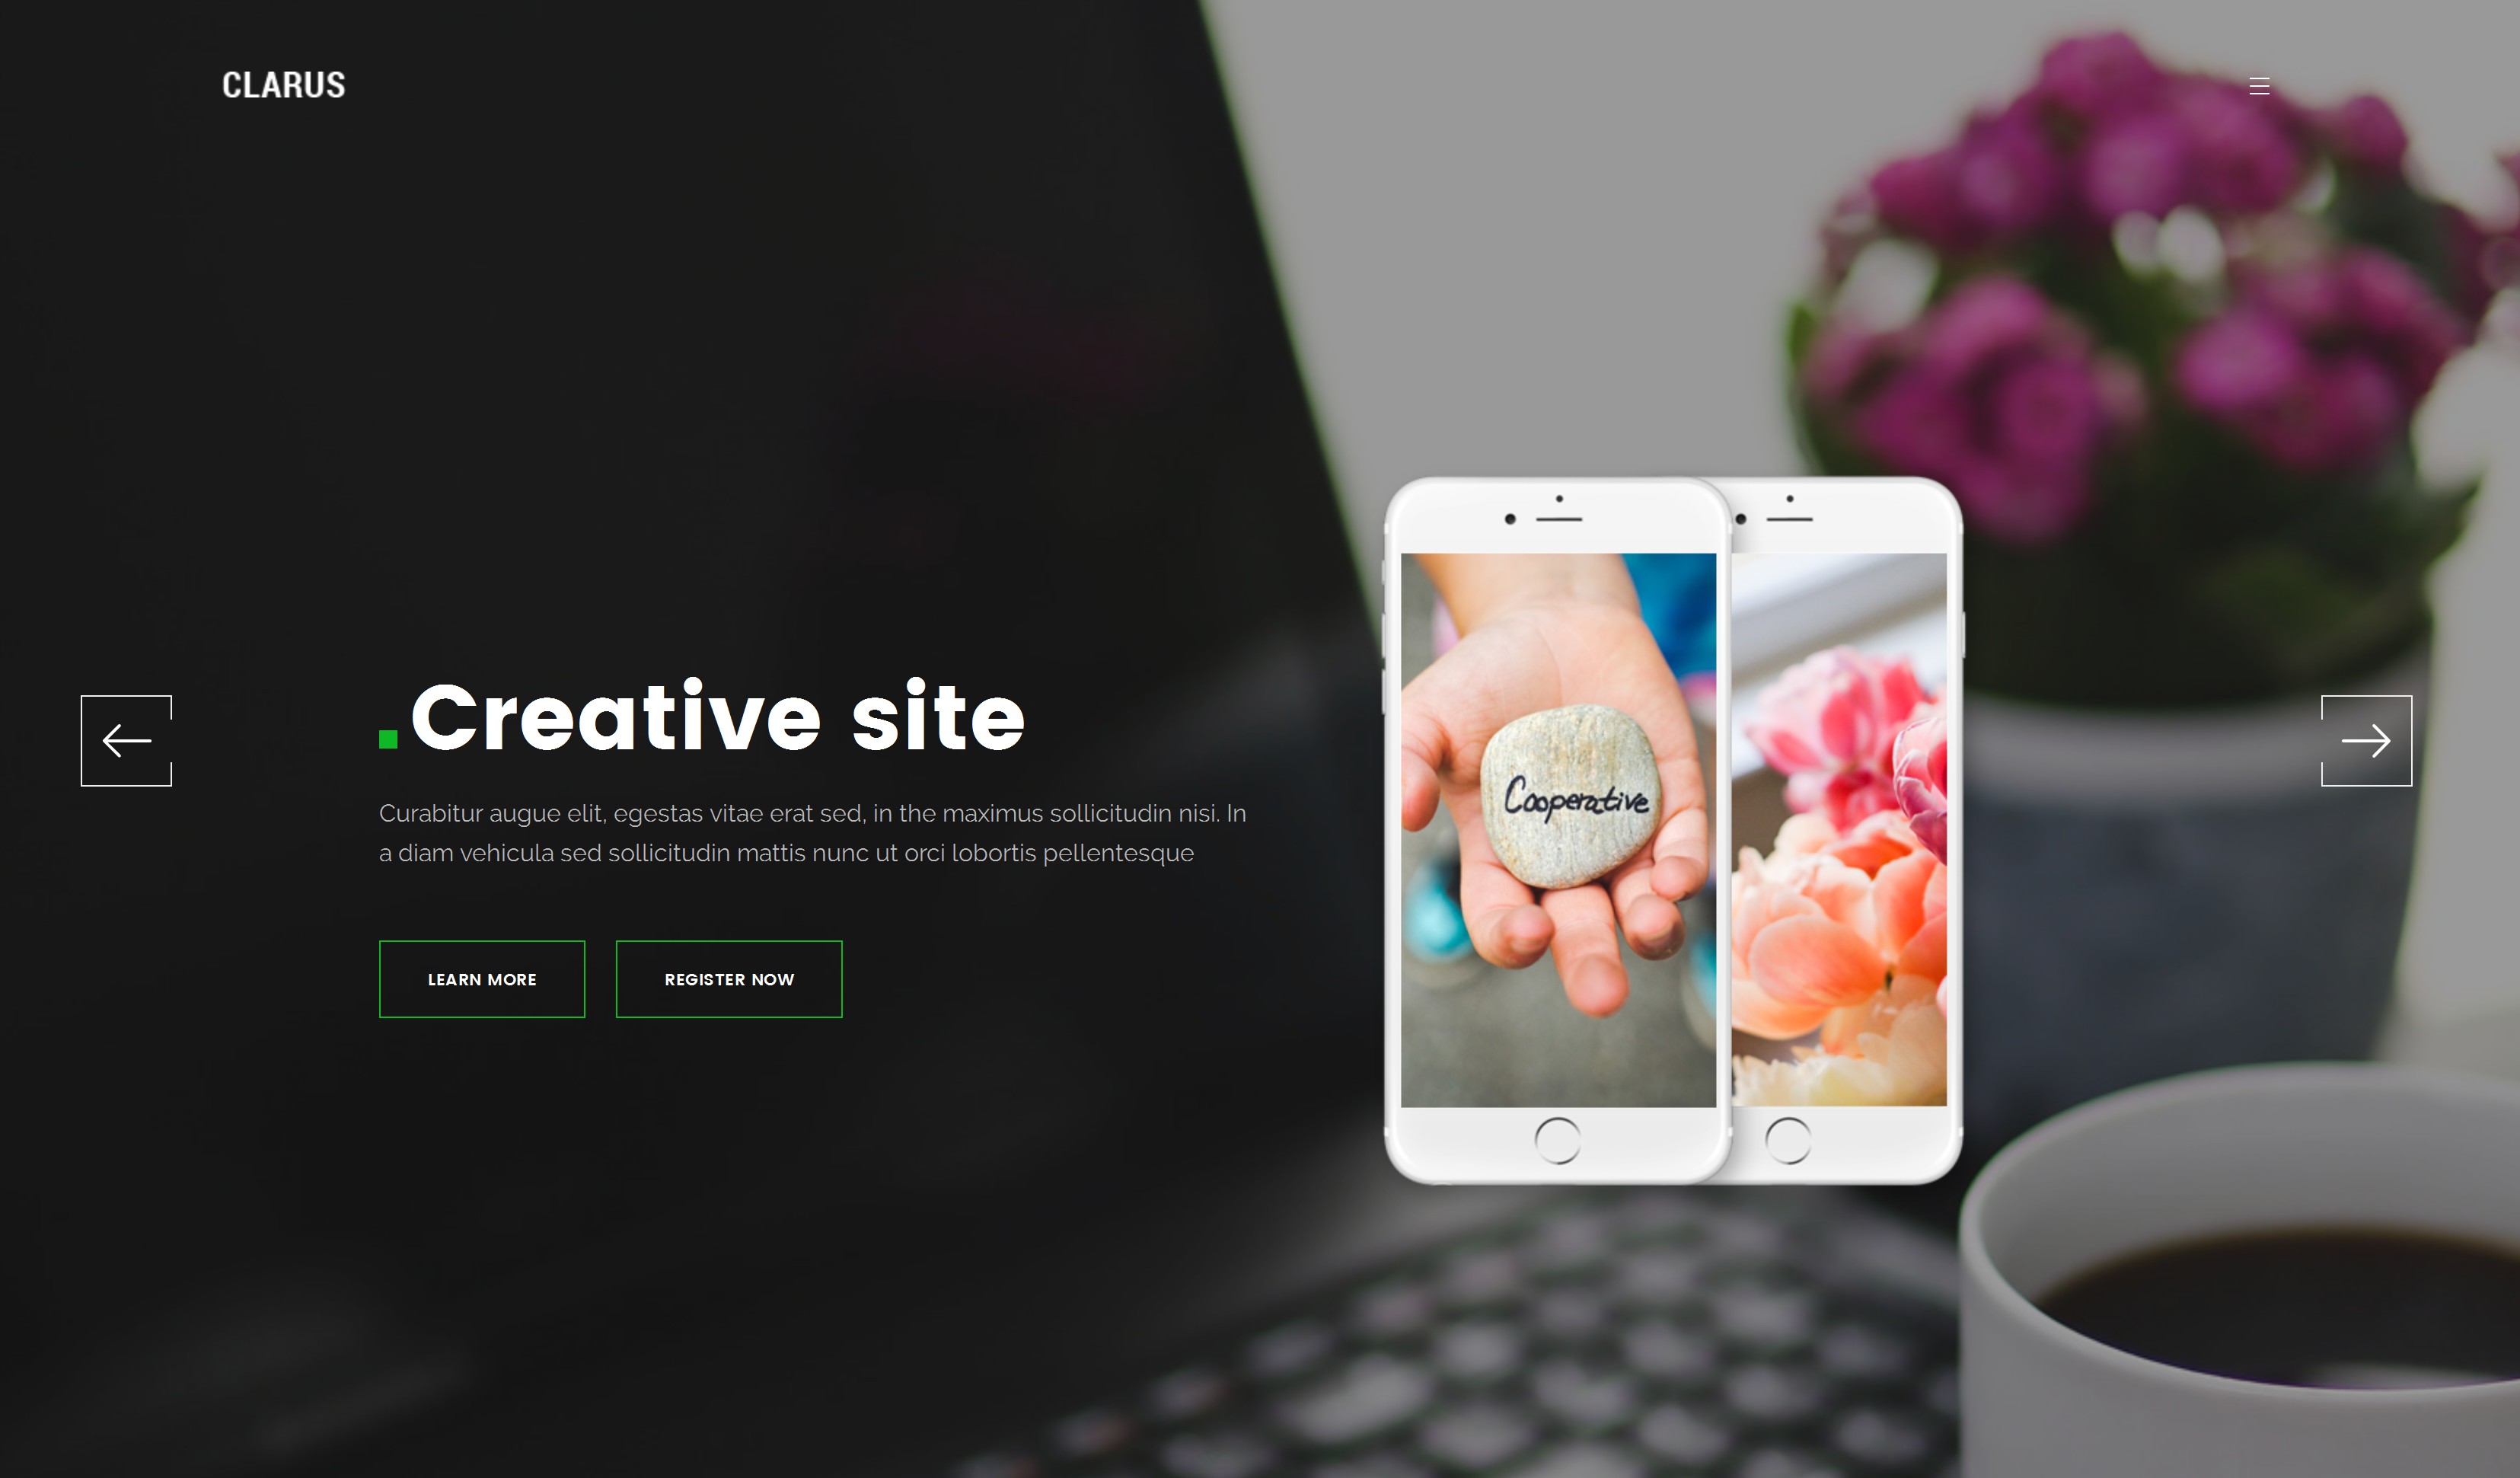 Free Download Bootstrap Website Theme